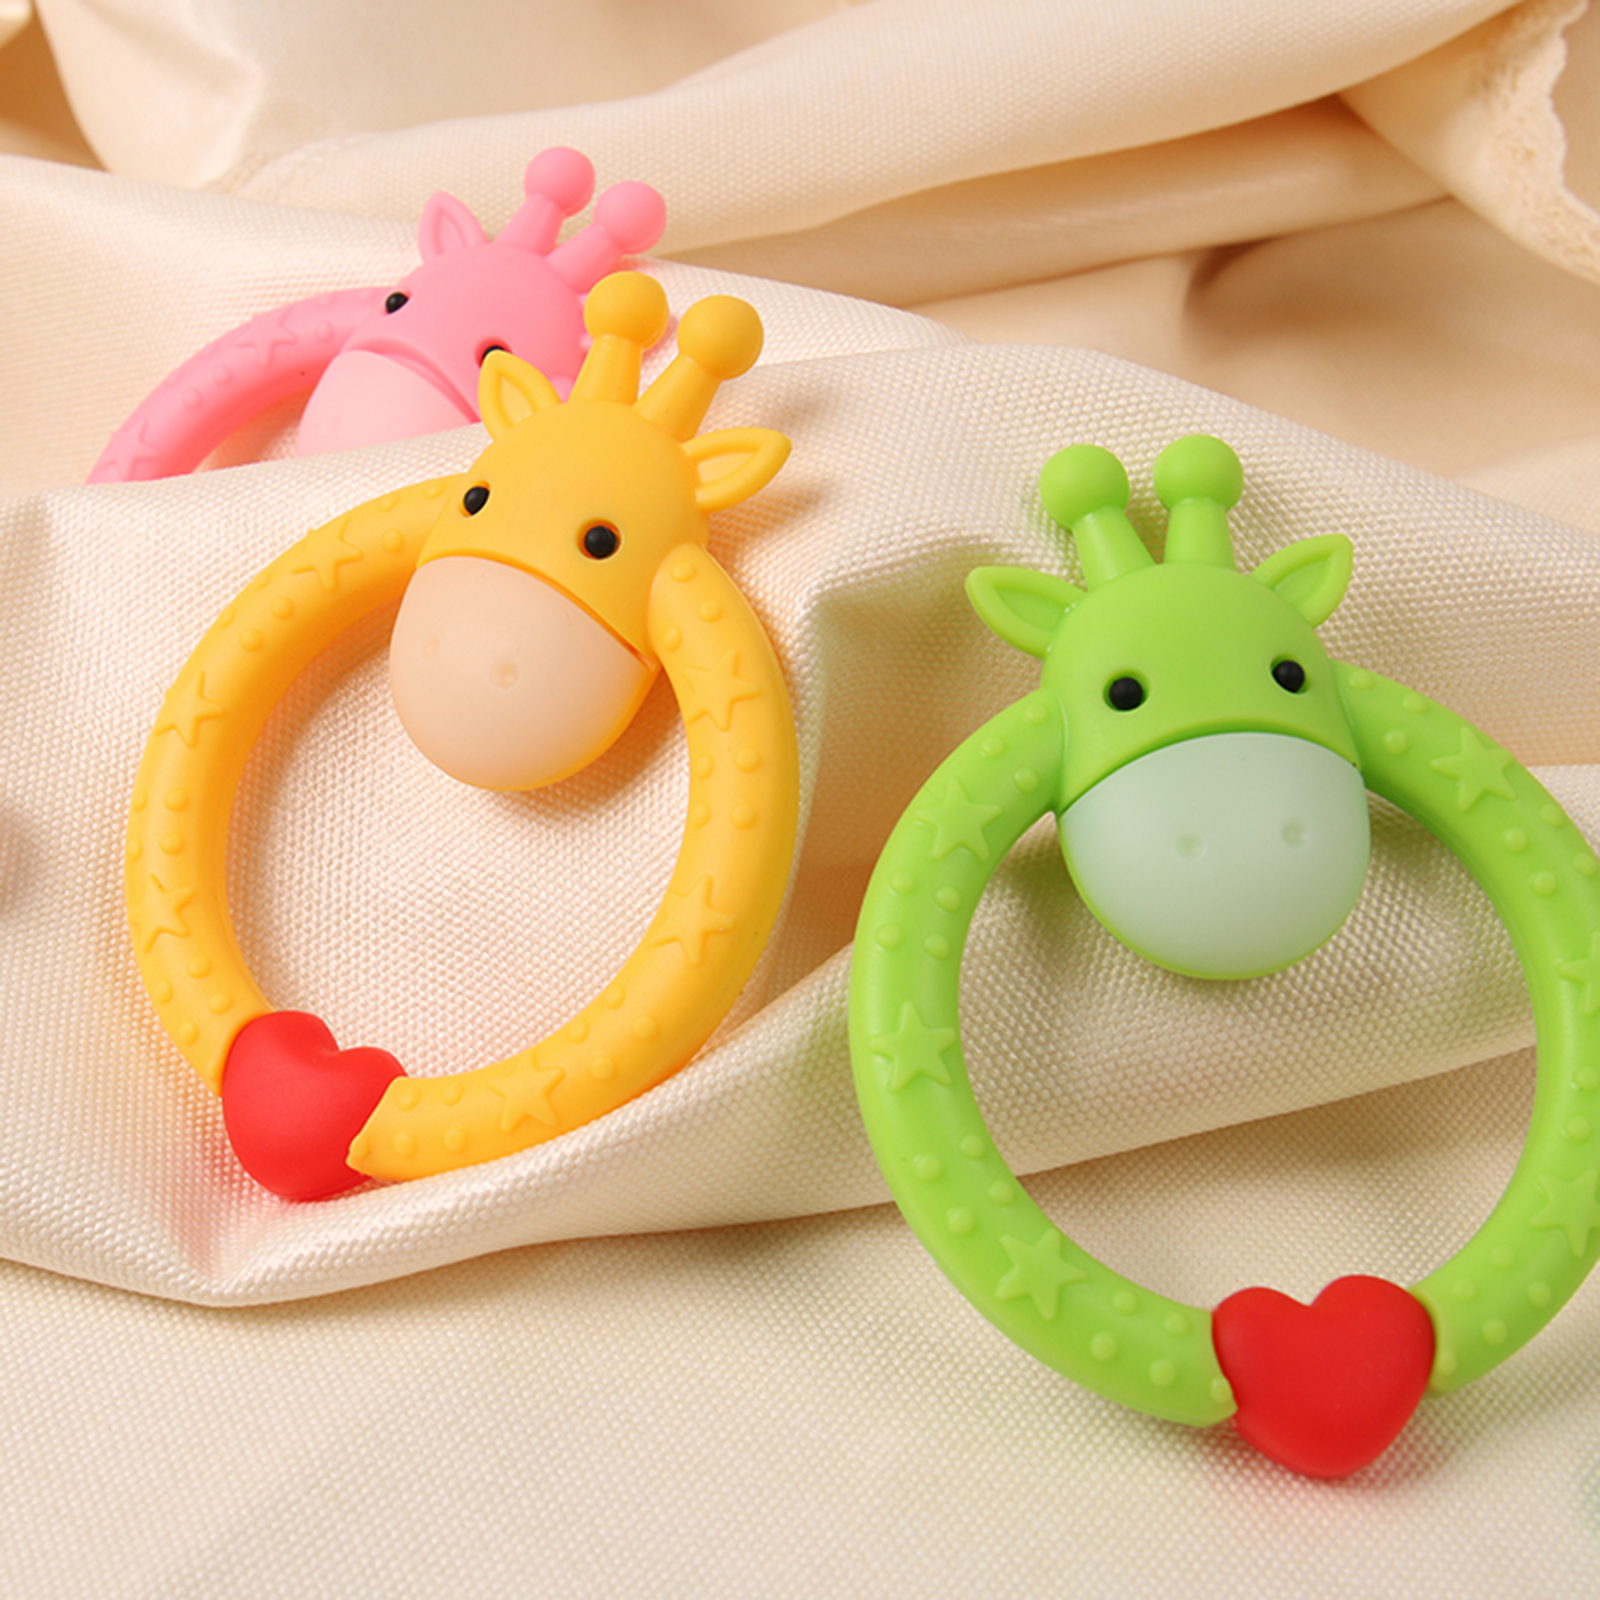 Innovative Baby Teether Ring Toy for Teething Relief 5 1